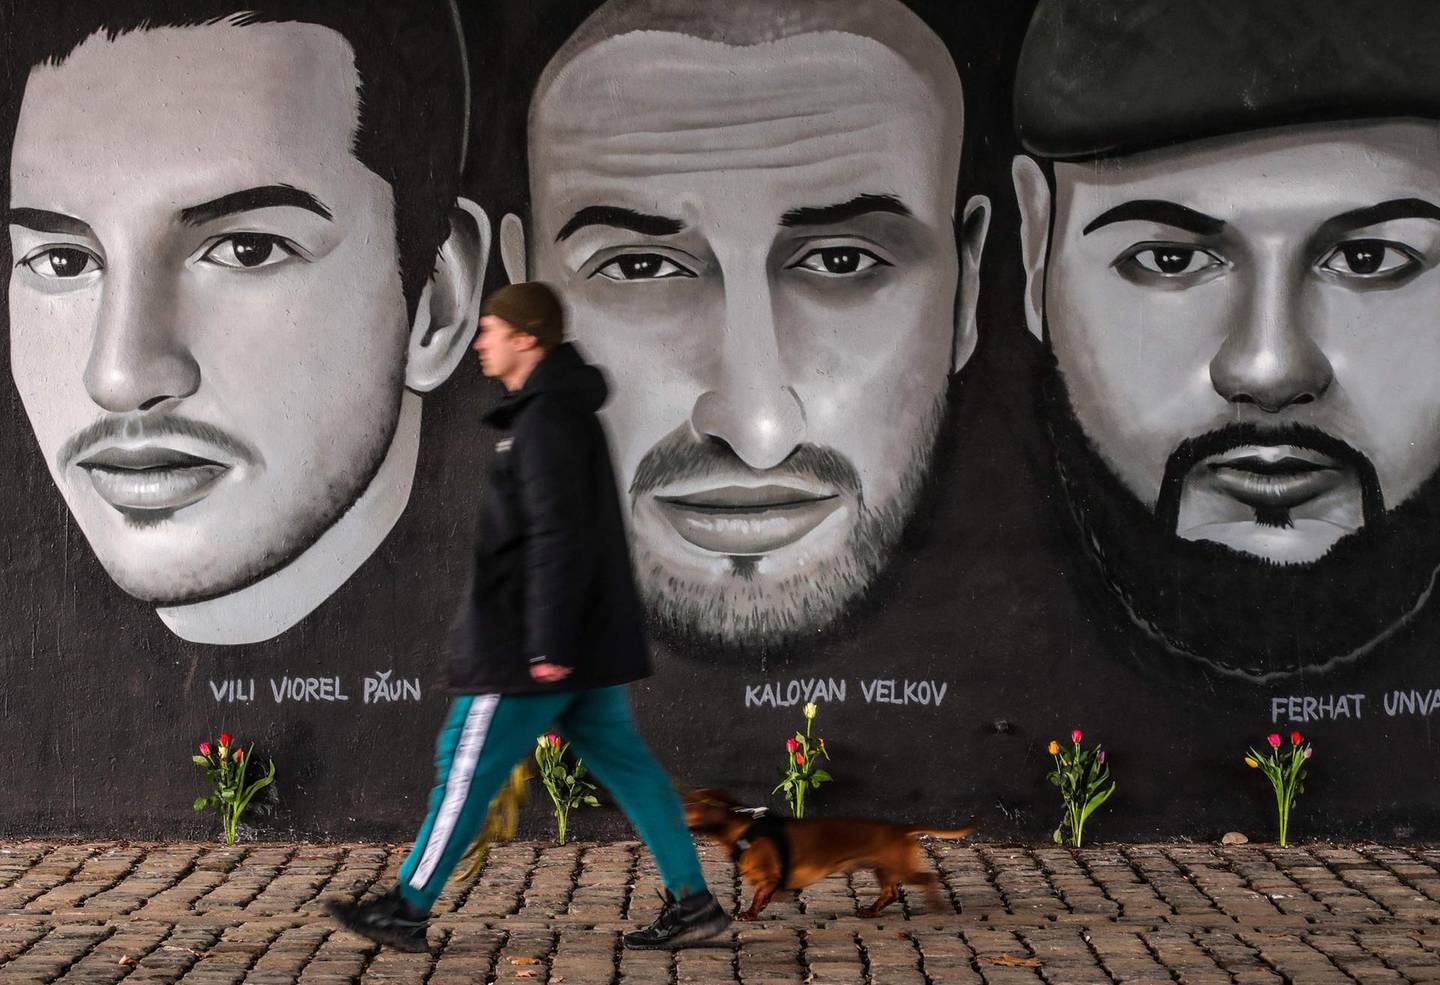 A man passes in front of a mural with portraits of victims of the 2020 Hanau shootings under a bridge in Frankfurt am Main, western Germany, on February 18, 2021, one day before commemorations to honour the victims.   The Hanau shootings occurred on February 19, 2020, when a gunman later identified as Tobias R. killed nine people by opening fire in two bars in the German city of Hanau near Frankfurt/Main. The 43-year-old man was later found dead alongside the corpse of his mother in his home, leaving behind a 24-page xenophobic "manifesto". 
 - RESTRICTED TO EDITORIAL USE - MANDATORY MENTION OF THE ARTIST UPON PUBLICATION - TO ILLUSTRATE THE EVENT AS SPECIFIED IN THE CAPTION
 / AFP / Armando BABANI / RESTRICTED TO EDITORIAL USE - MANDATORY MENTION OF THE ARTIST UPON PUBLICATION - TO ILLUSTRATE THE EVENT AS SPECIFIED IN THE CAPTION
